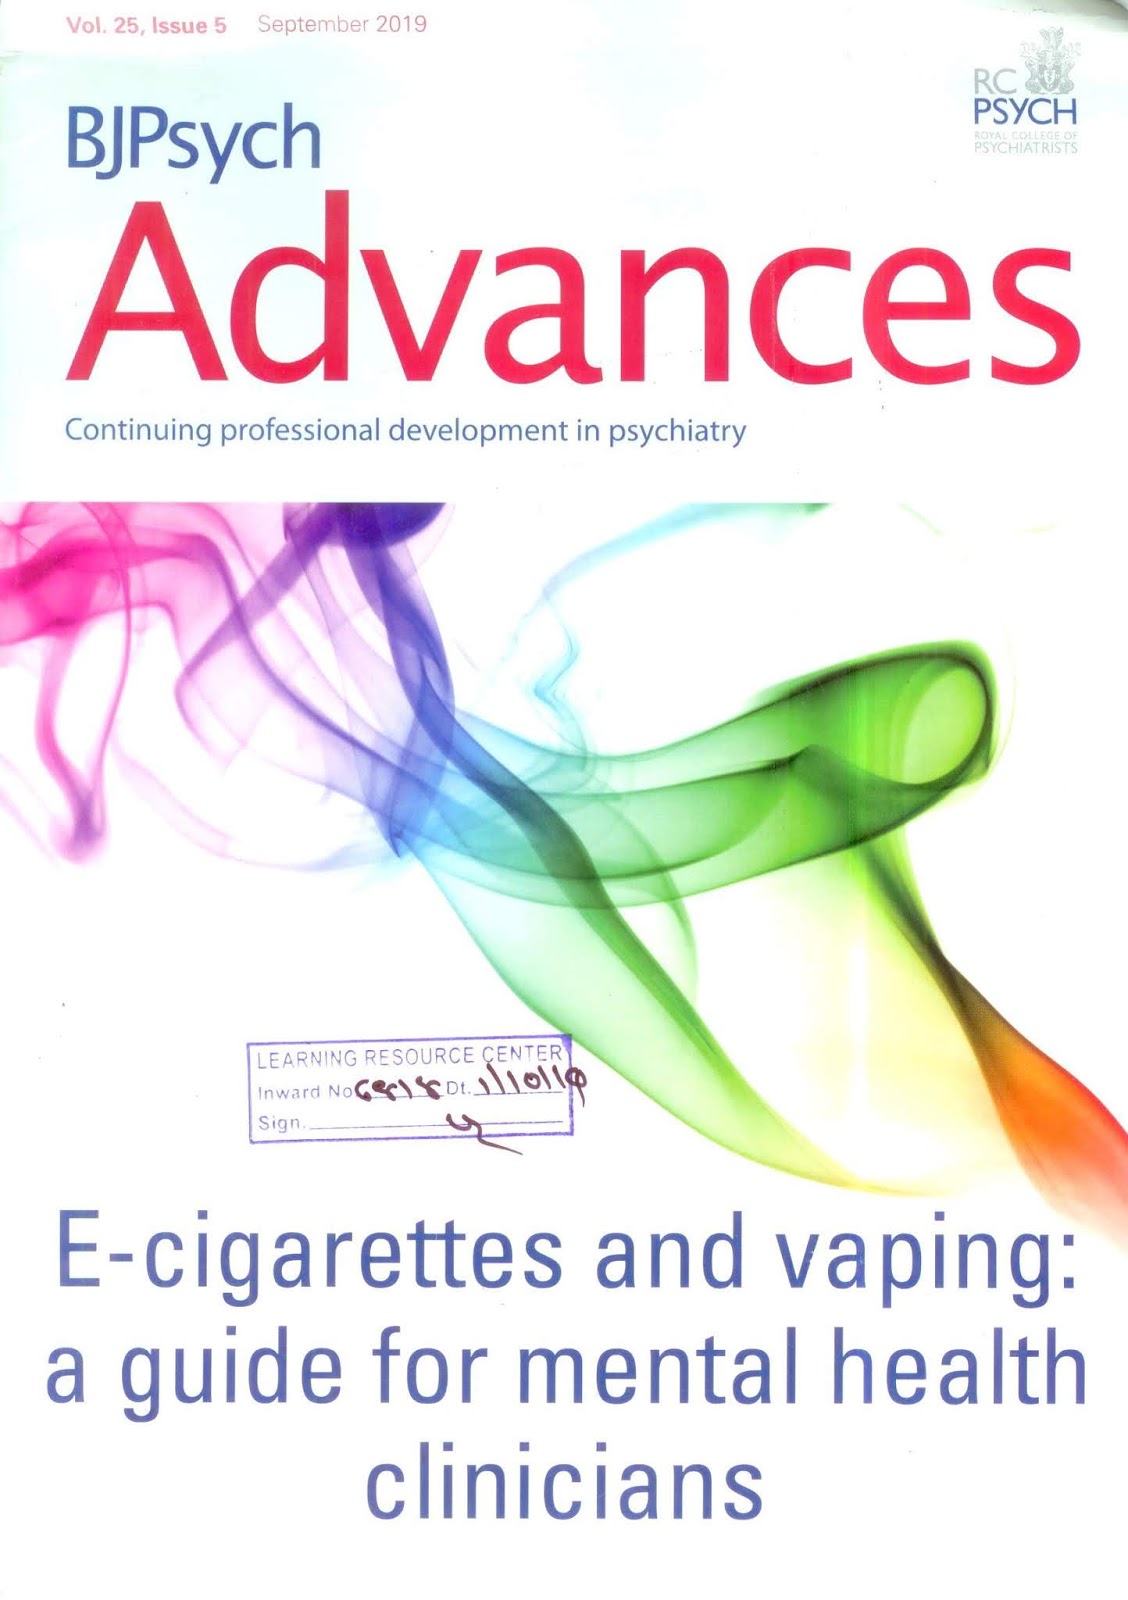 https://www.cambridge.org/core/journals/bjpsych-advances/issue/1EFB5D7CFB29F235BC11EA1AED551320